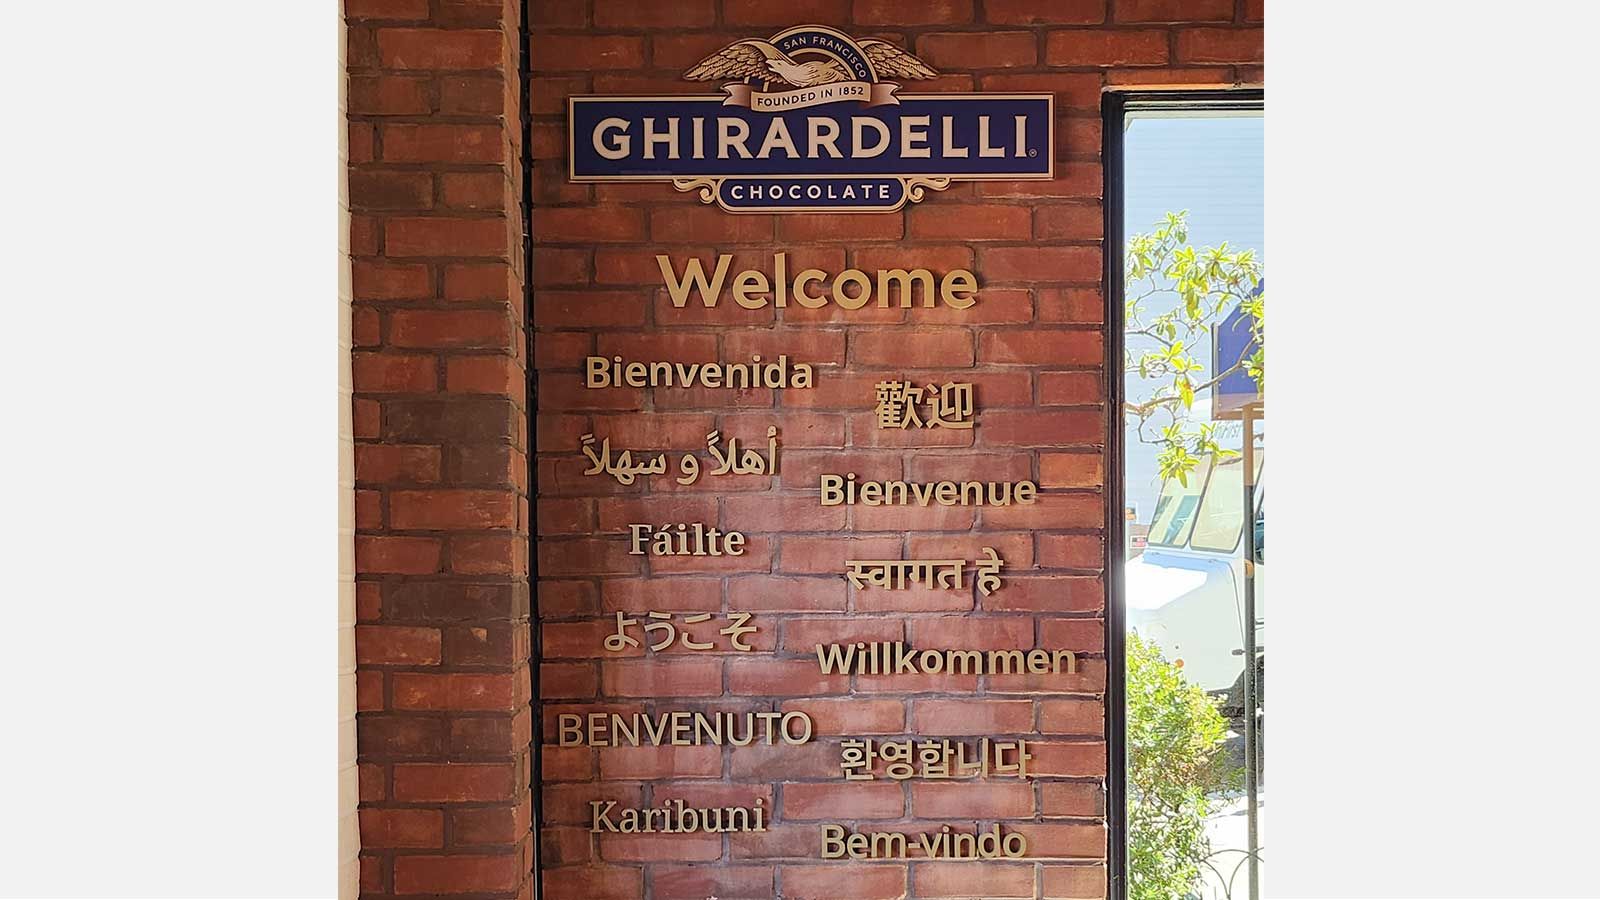 Ghirardelli Chocolate Company acrylic signs on the wall